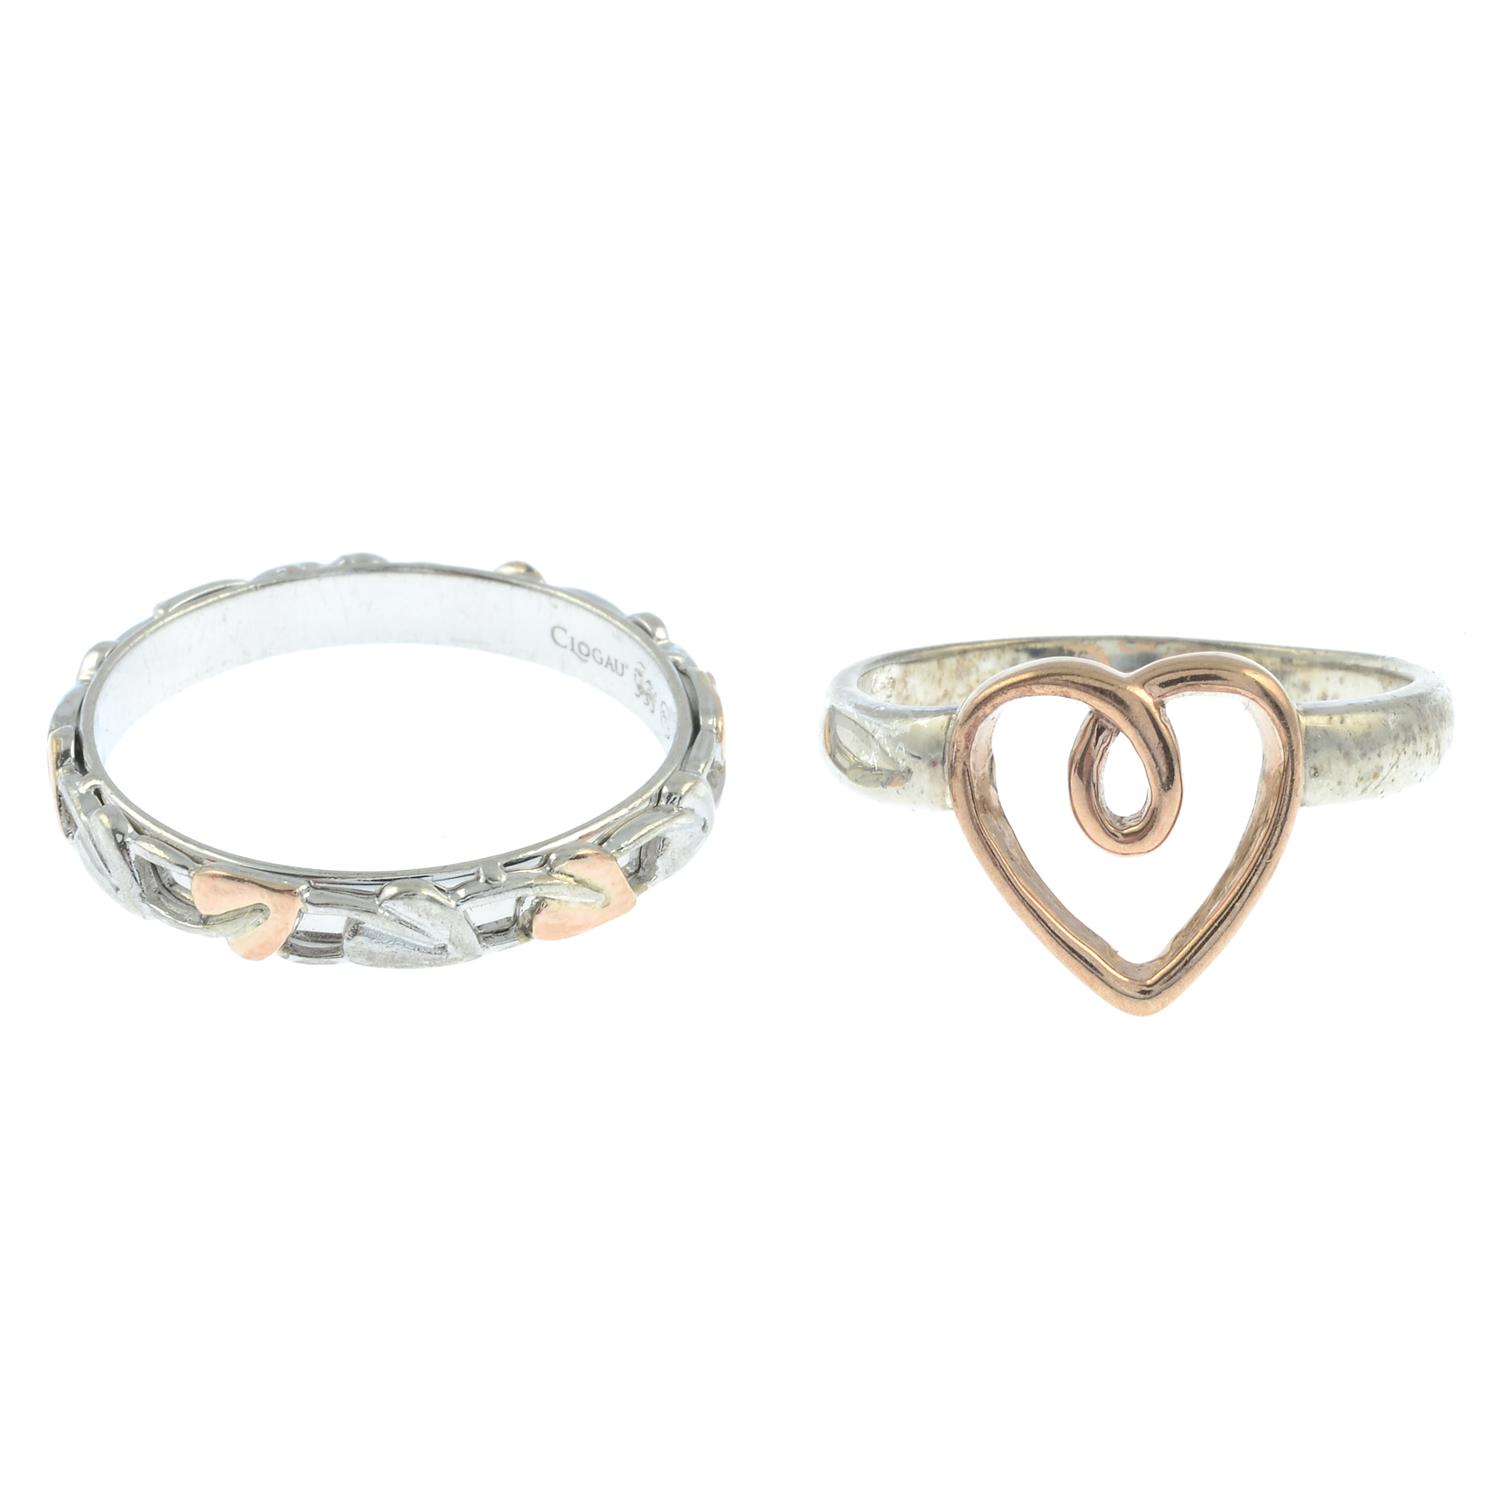 Two silver rings, by Clogau.